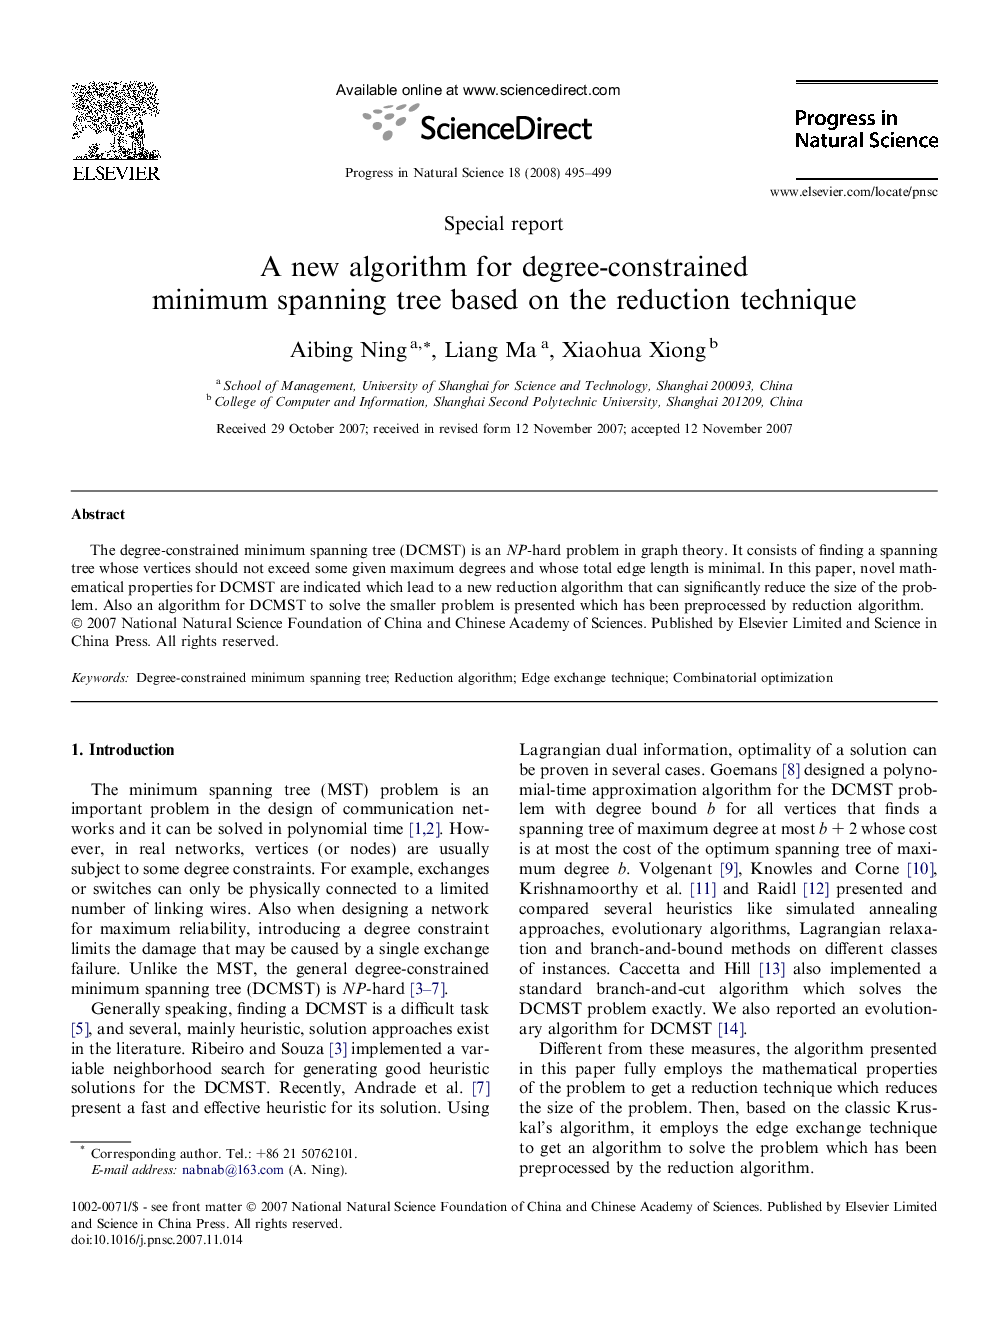 A new algorithm for degree-constrained minimum spanning tree based on the reduction technique